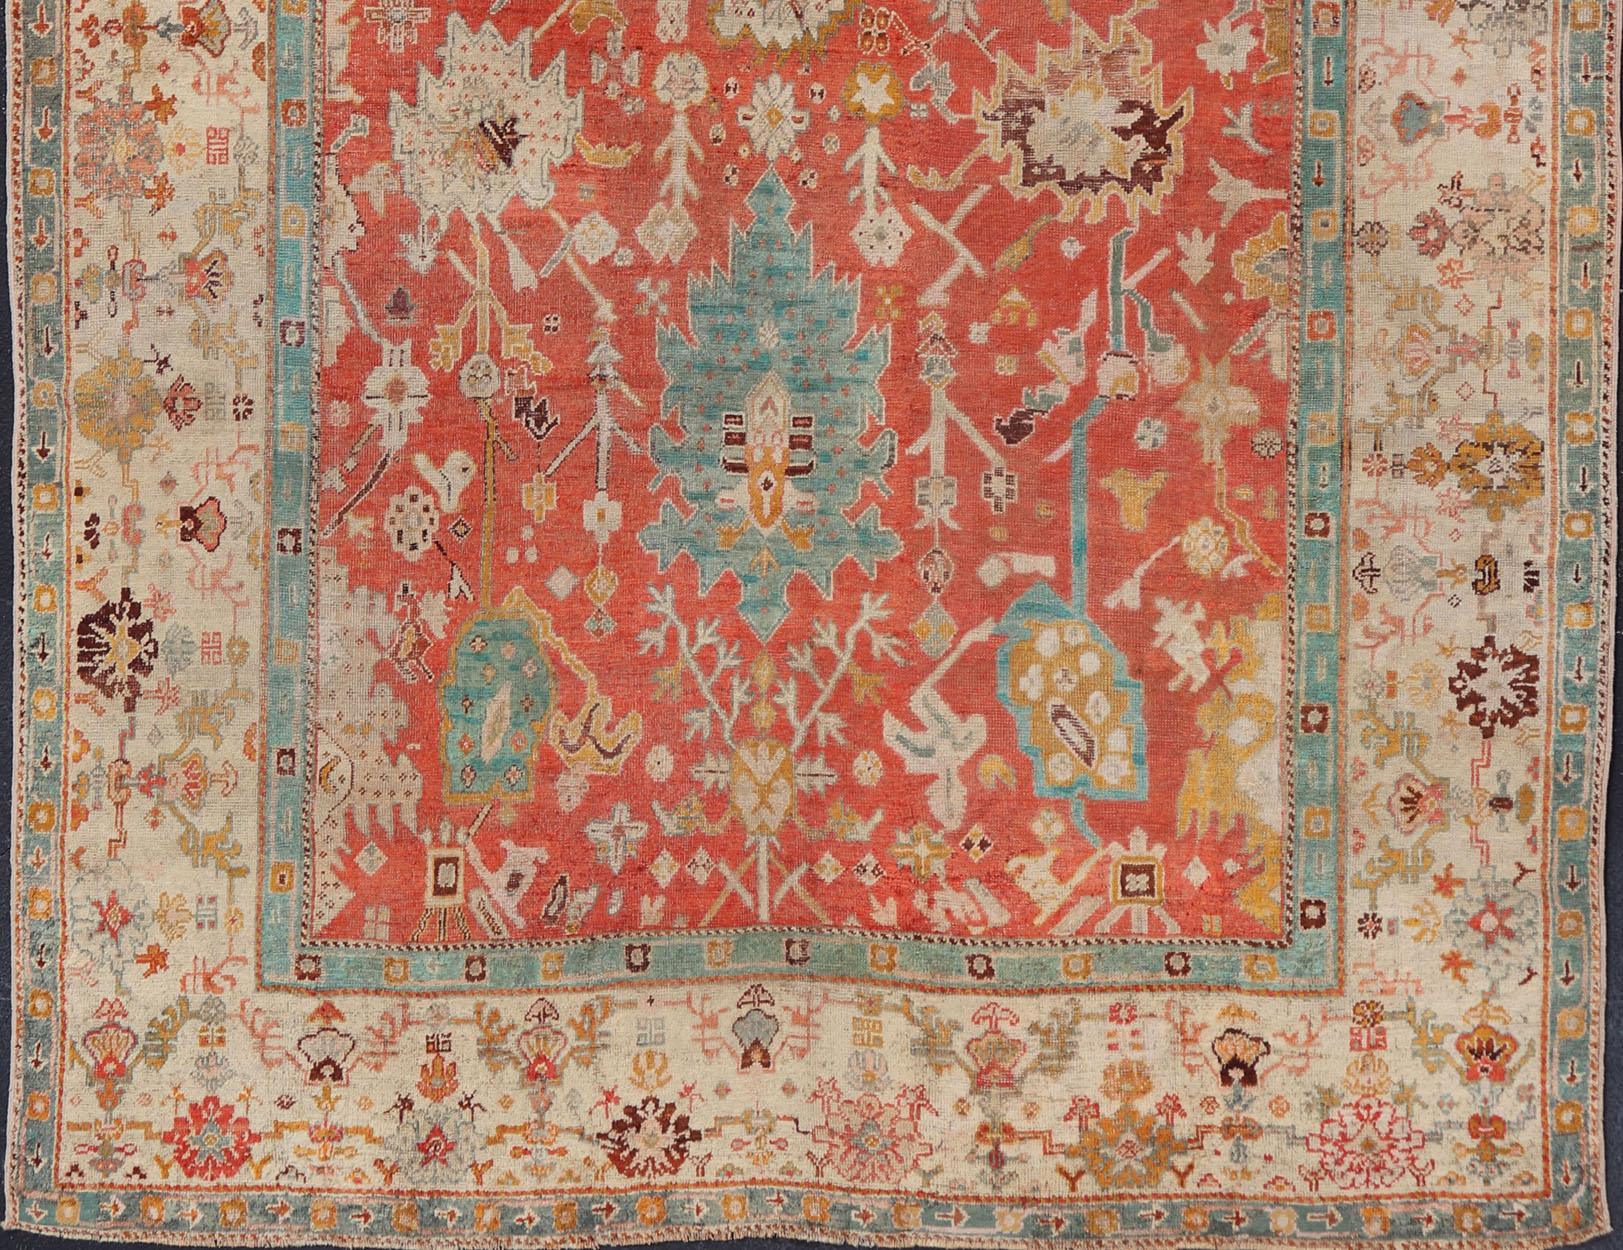 Antique Turkish Oushak In Tribal Motifs in Soft Coral, Blue, Marigold, and Cream For Sale 6